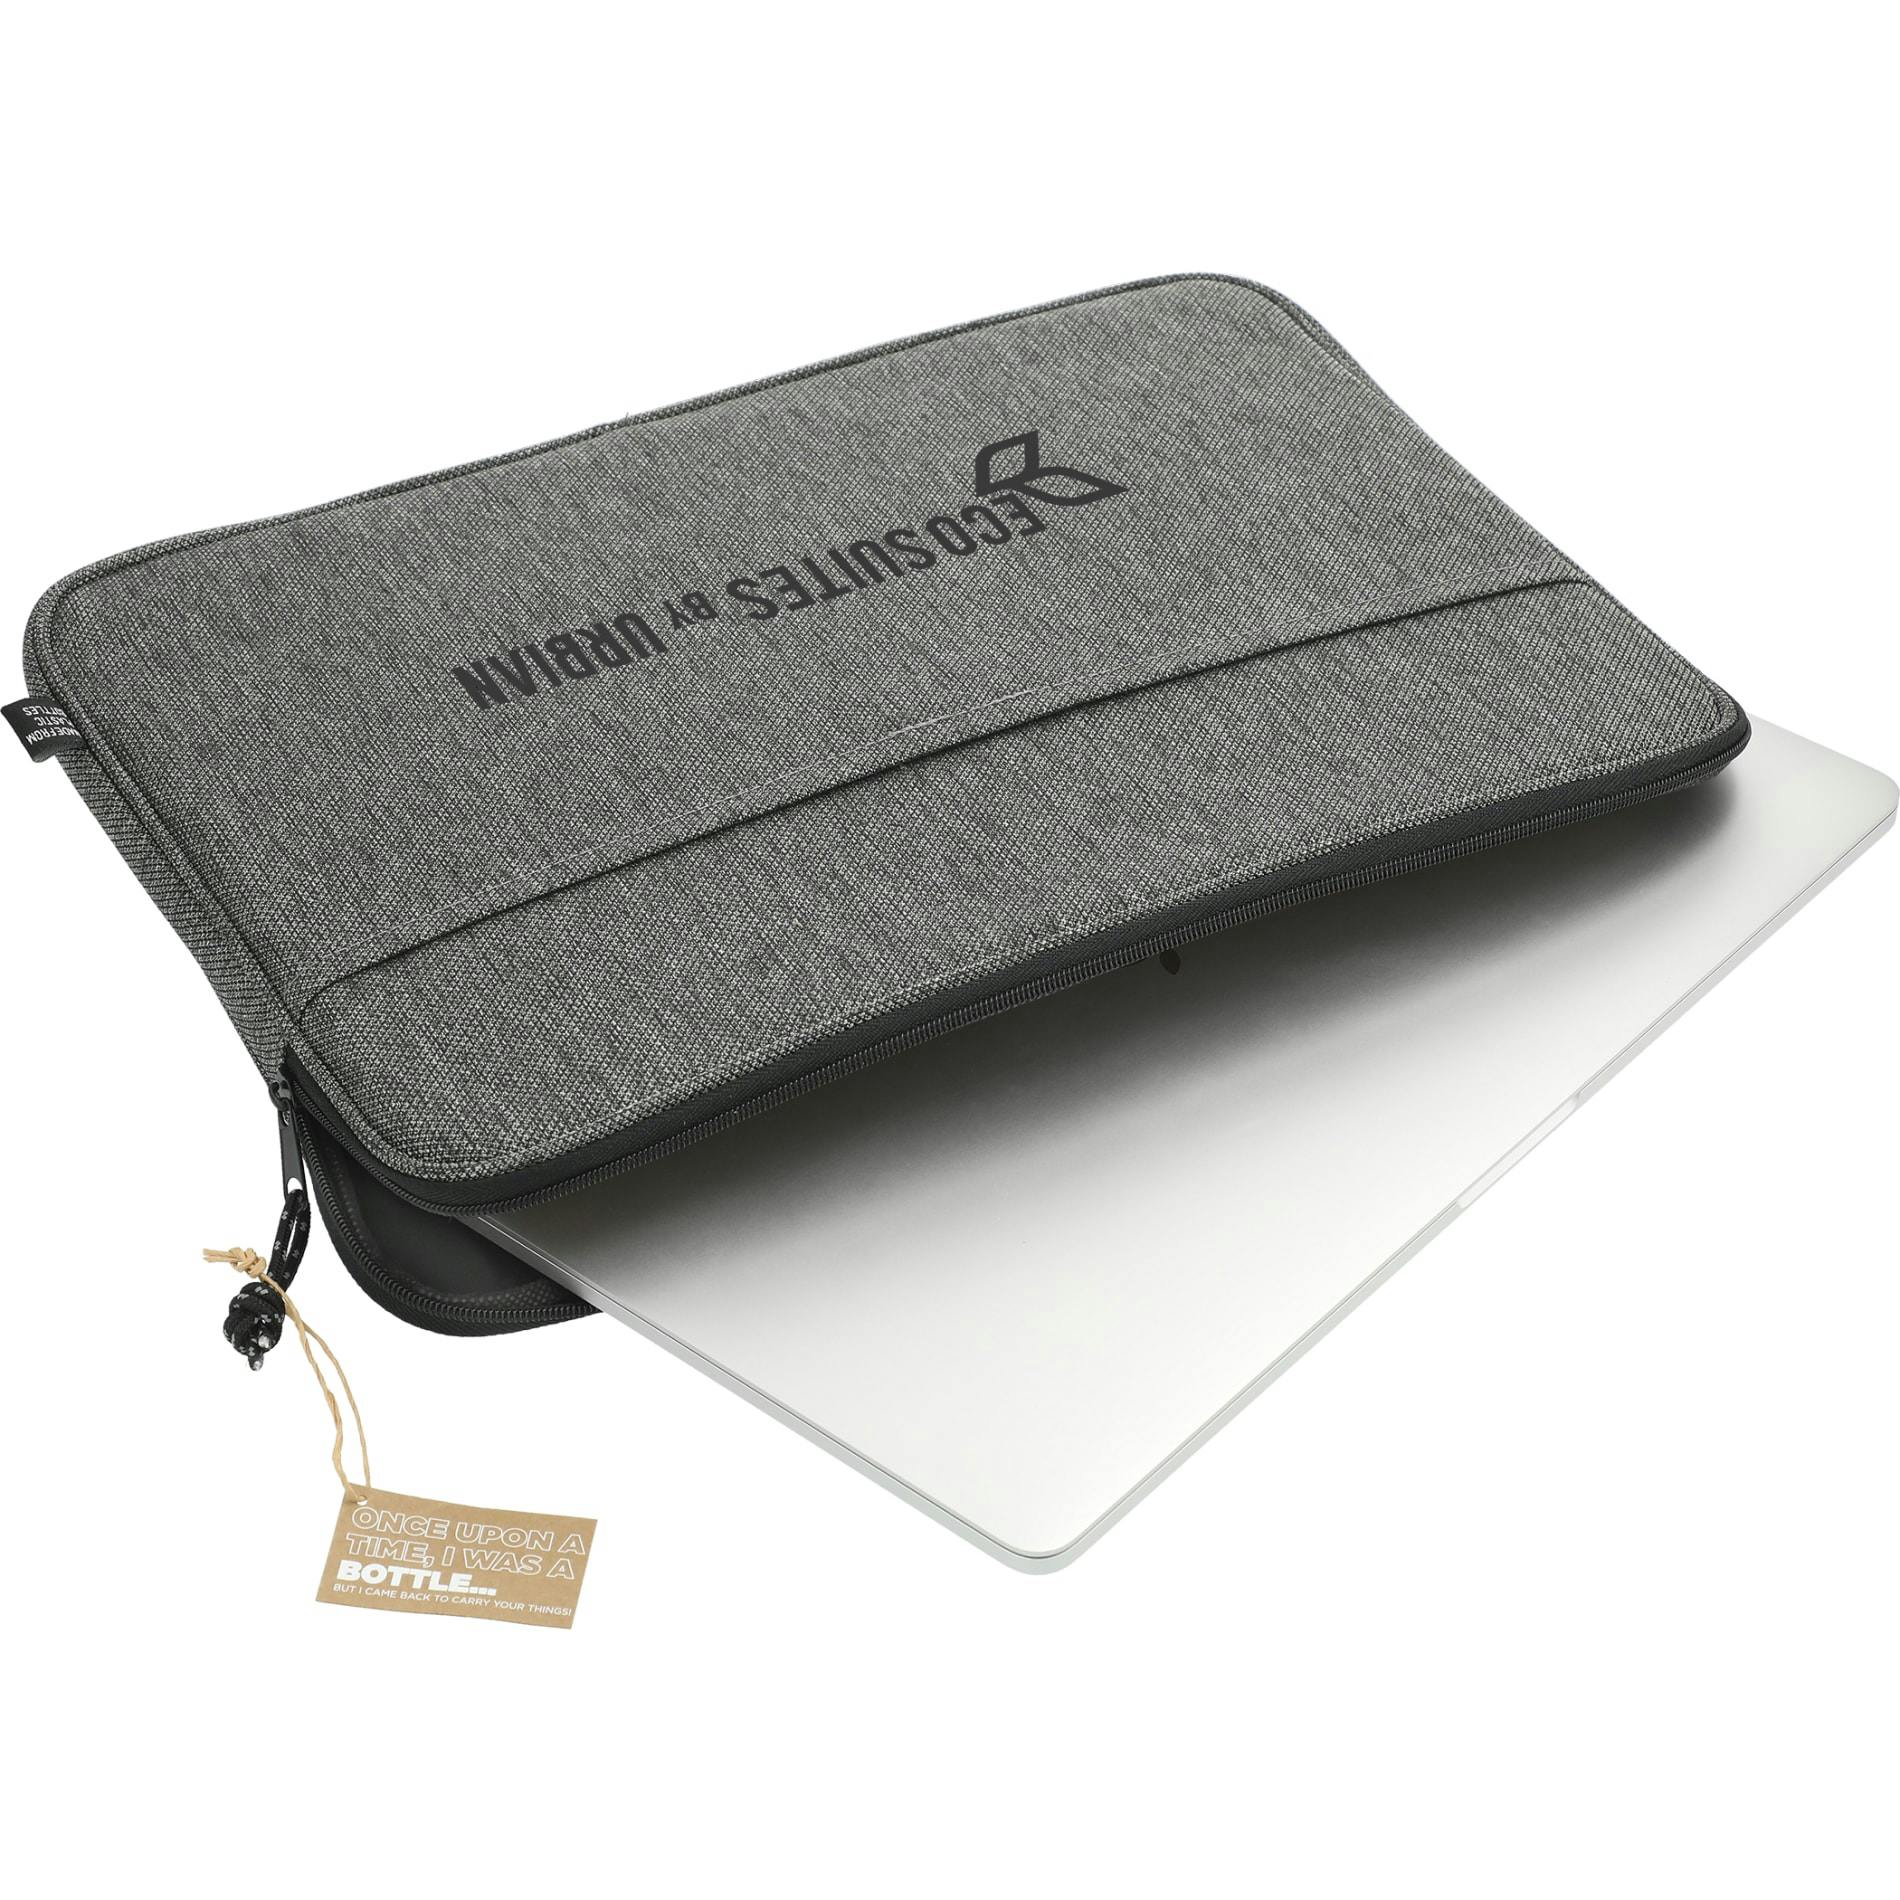 Vila Recycled 15" Computer Sleeve - additional Image 5